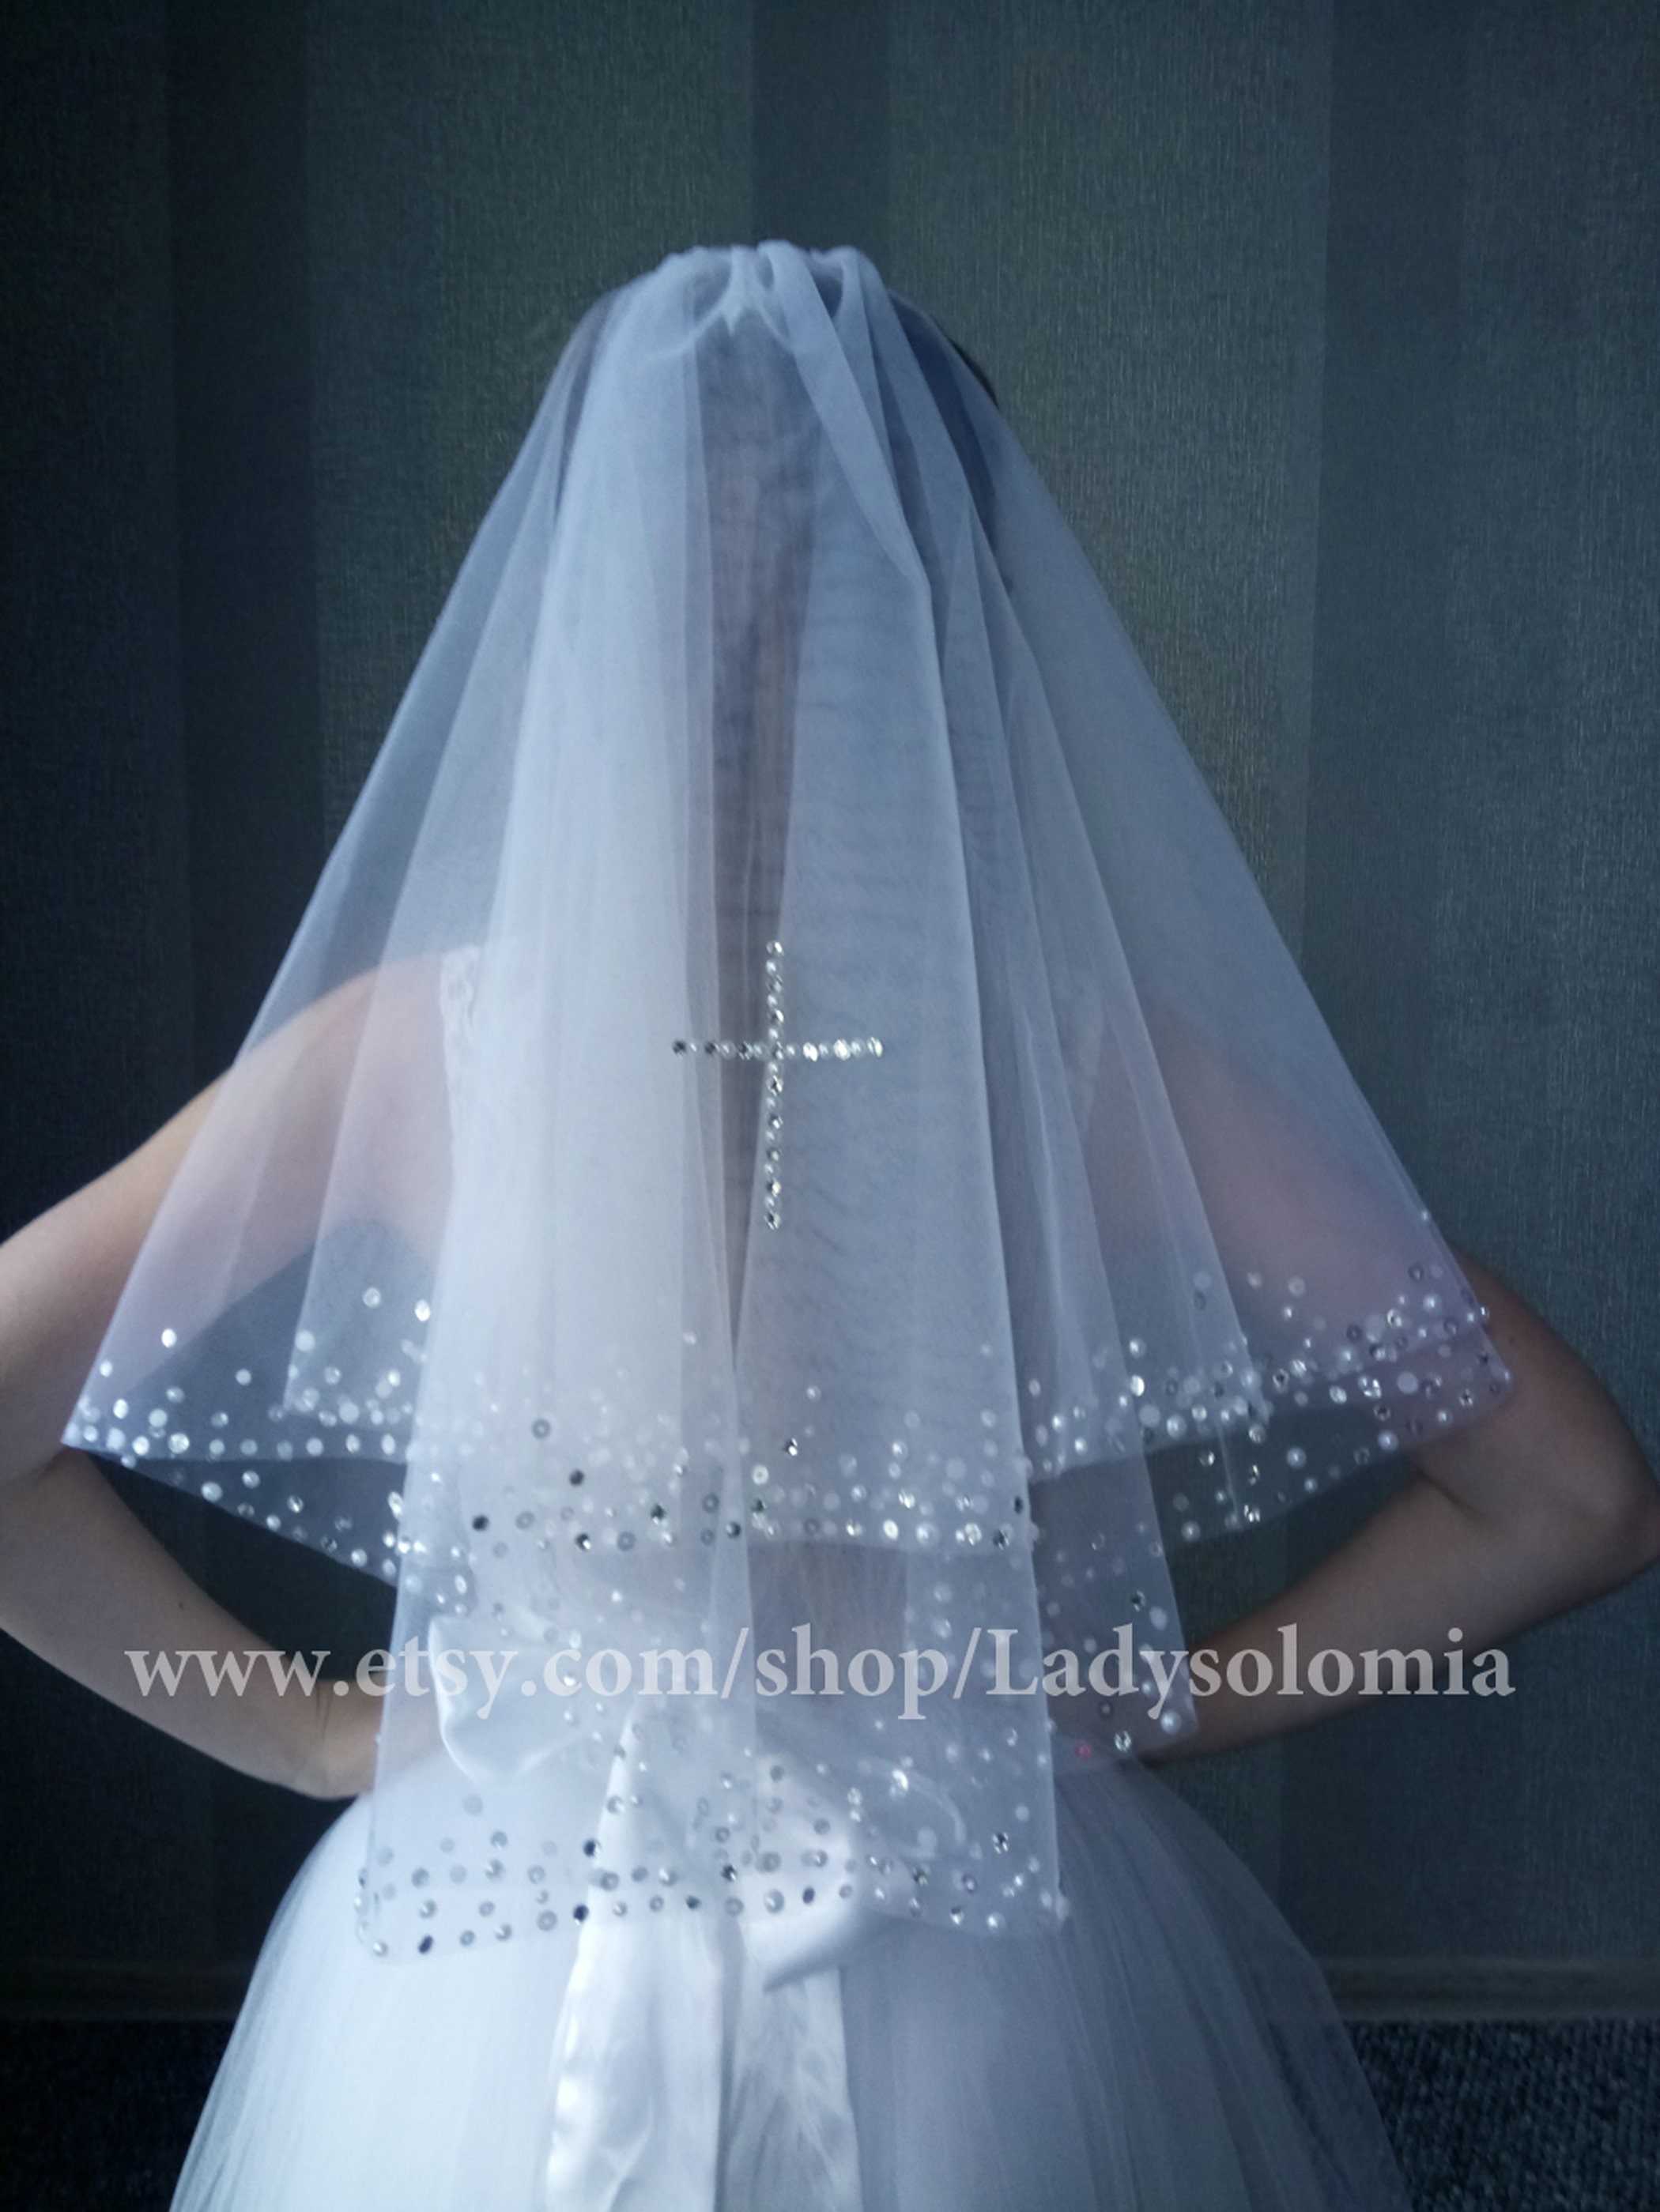 First Communion Wreath Veil With Pearls and Crystals, Catholic First Communion  Veils